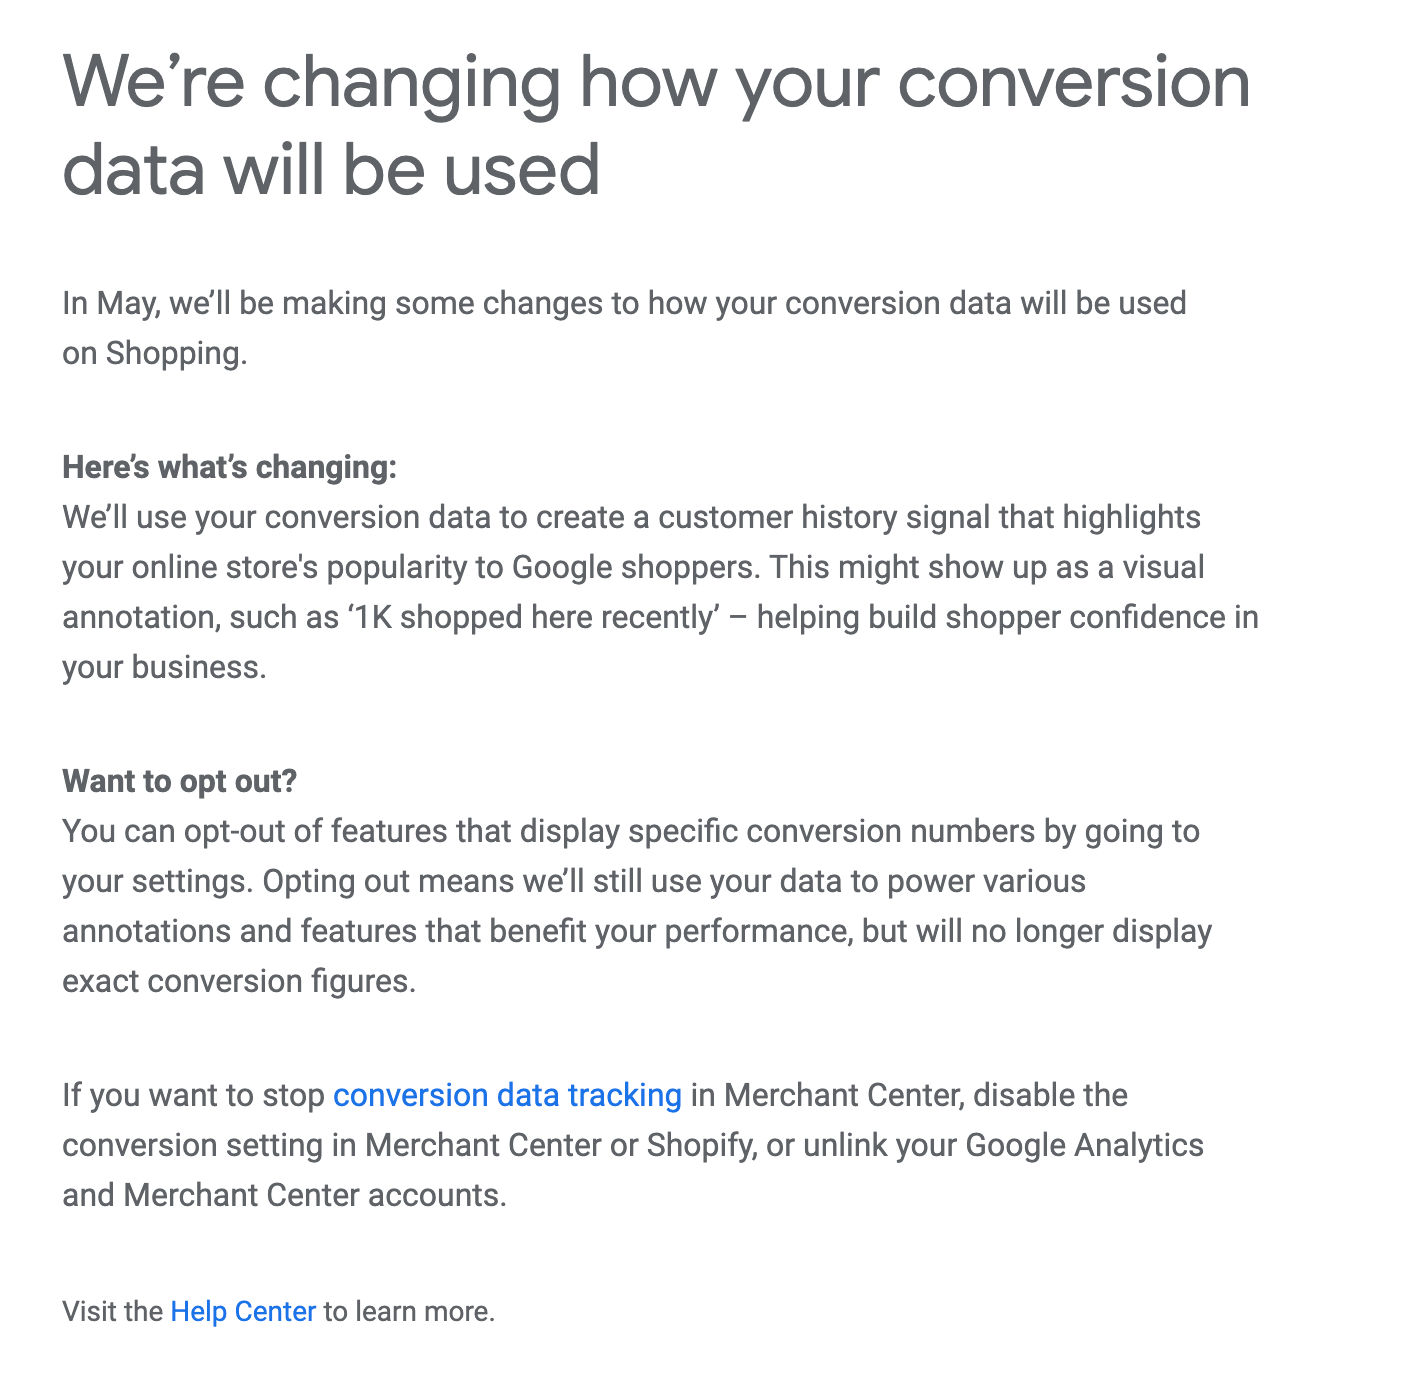 Email Explainer: We’re changing how your conversion data will be used